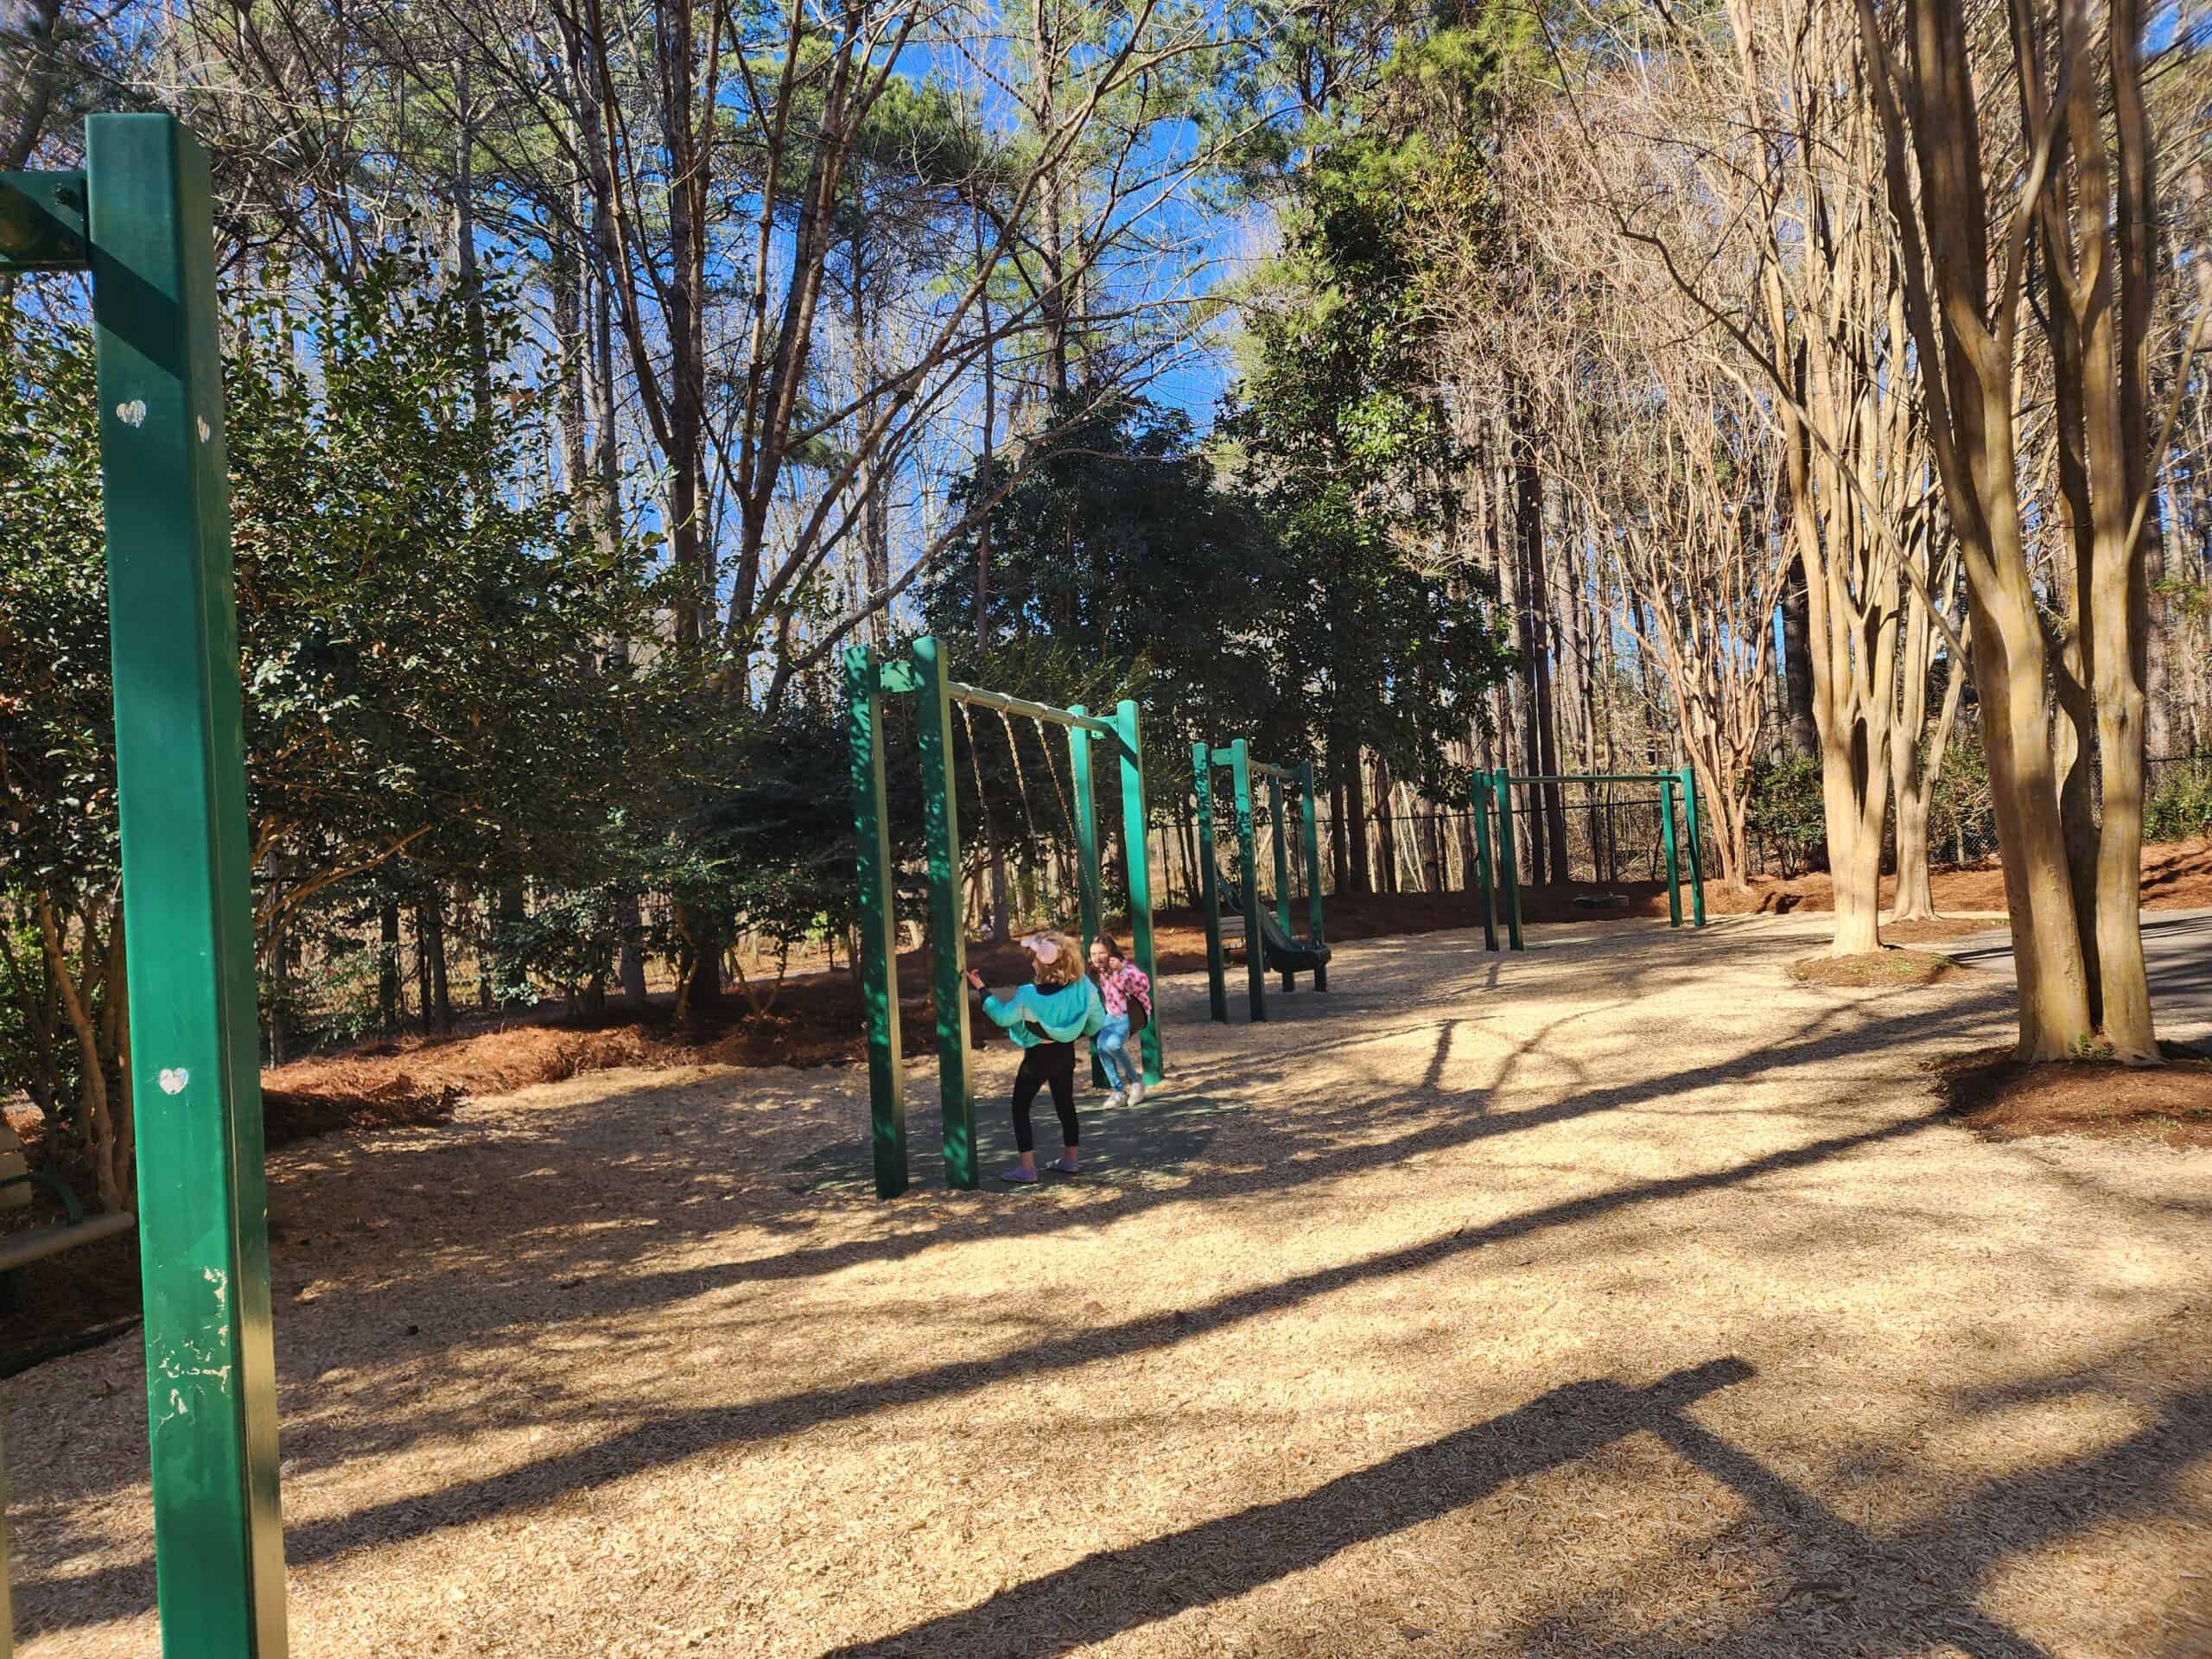 Children play on green swing sets at a Cary, NC, playground nestled among tall, slender trees casting long shadows on the mulch-covered ground. The serene park atmosphere is infused with the energy of childhood joy and the tranquility of a forest setting